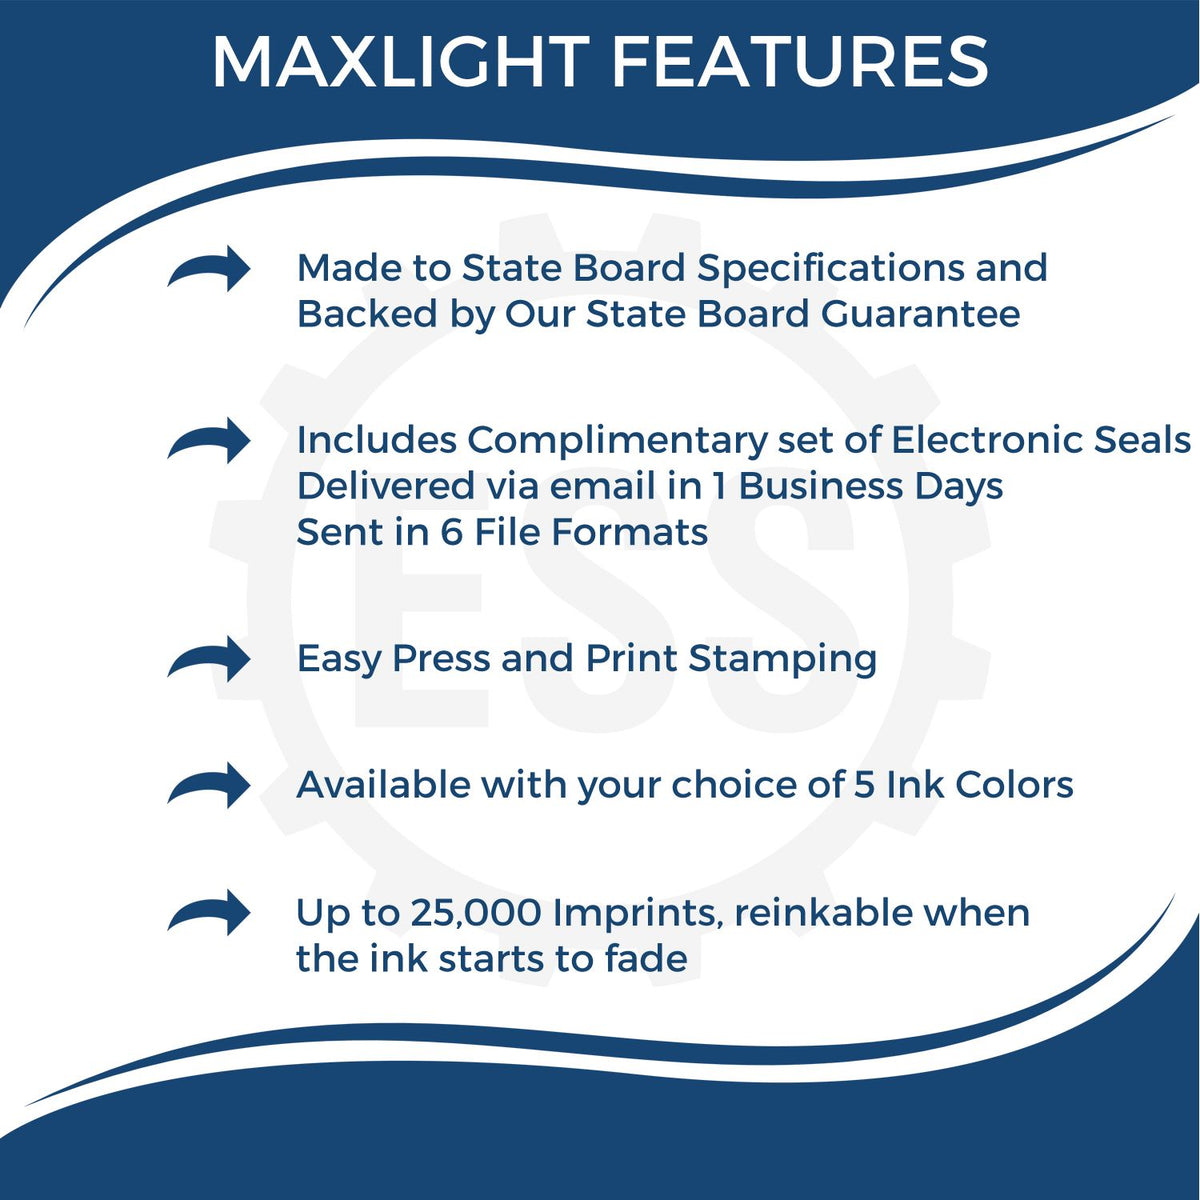 A picture of an infographic highlighting the selling points for the Premium MaxLight Pre-Inked Florida Engineering Stamp